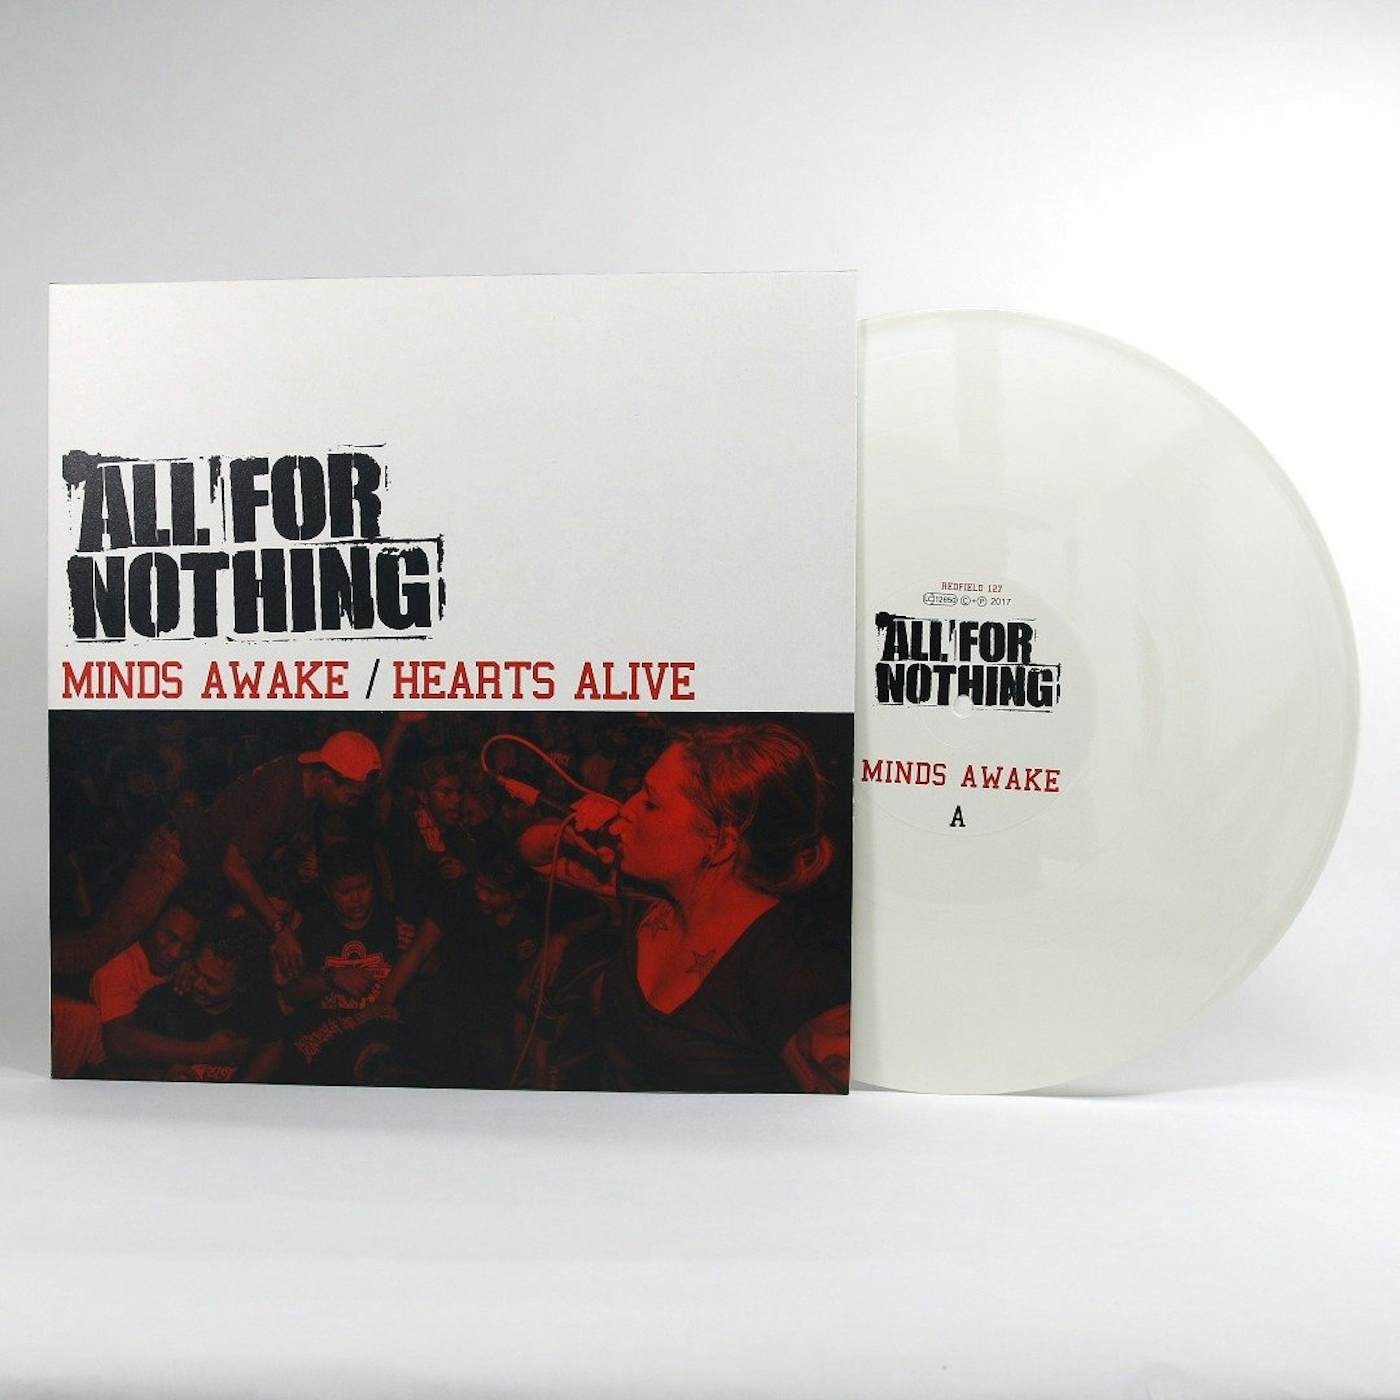  All Or Nothing: CDs & Vinyl